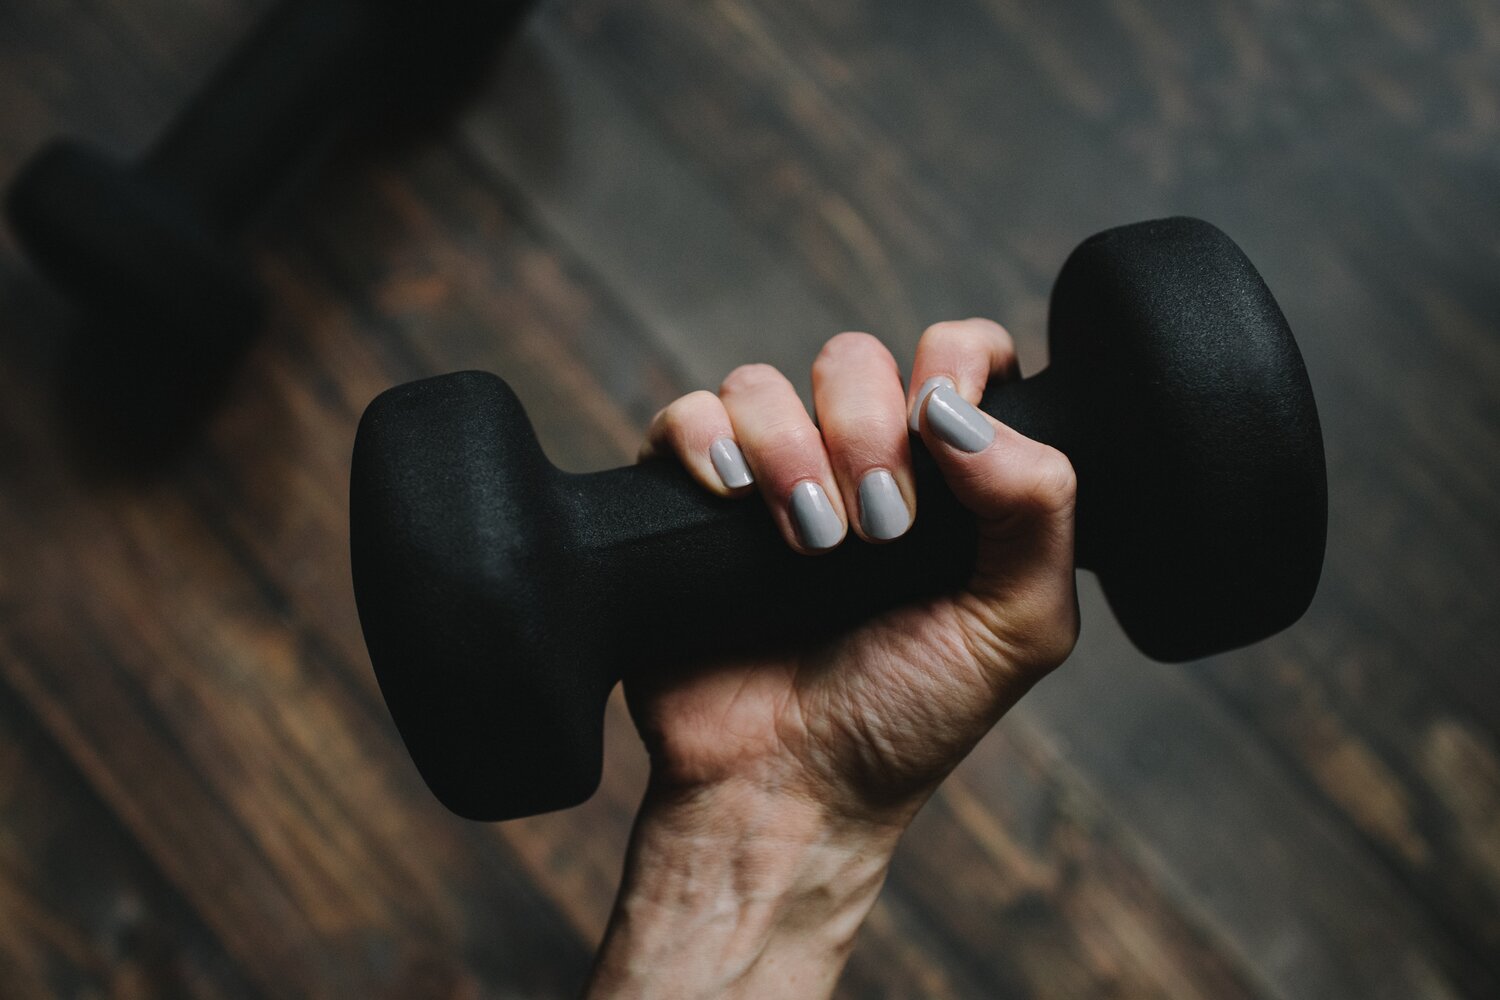 Lifting weights is one key for burning more calories and boosting bone health